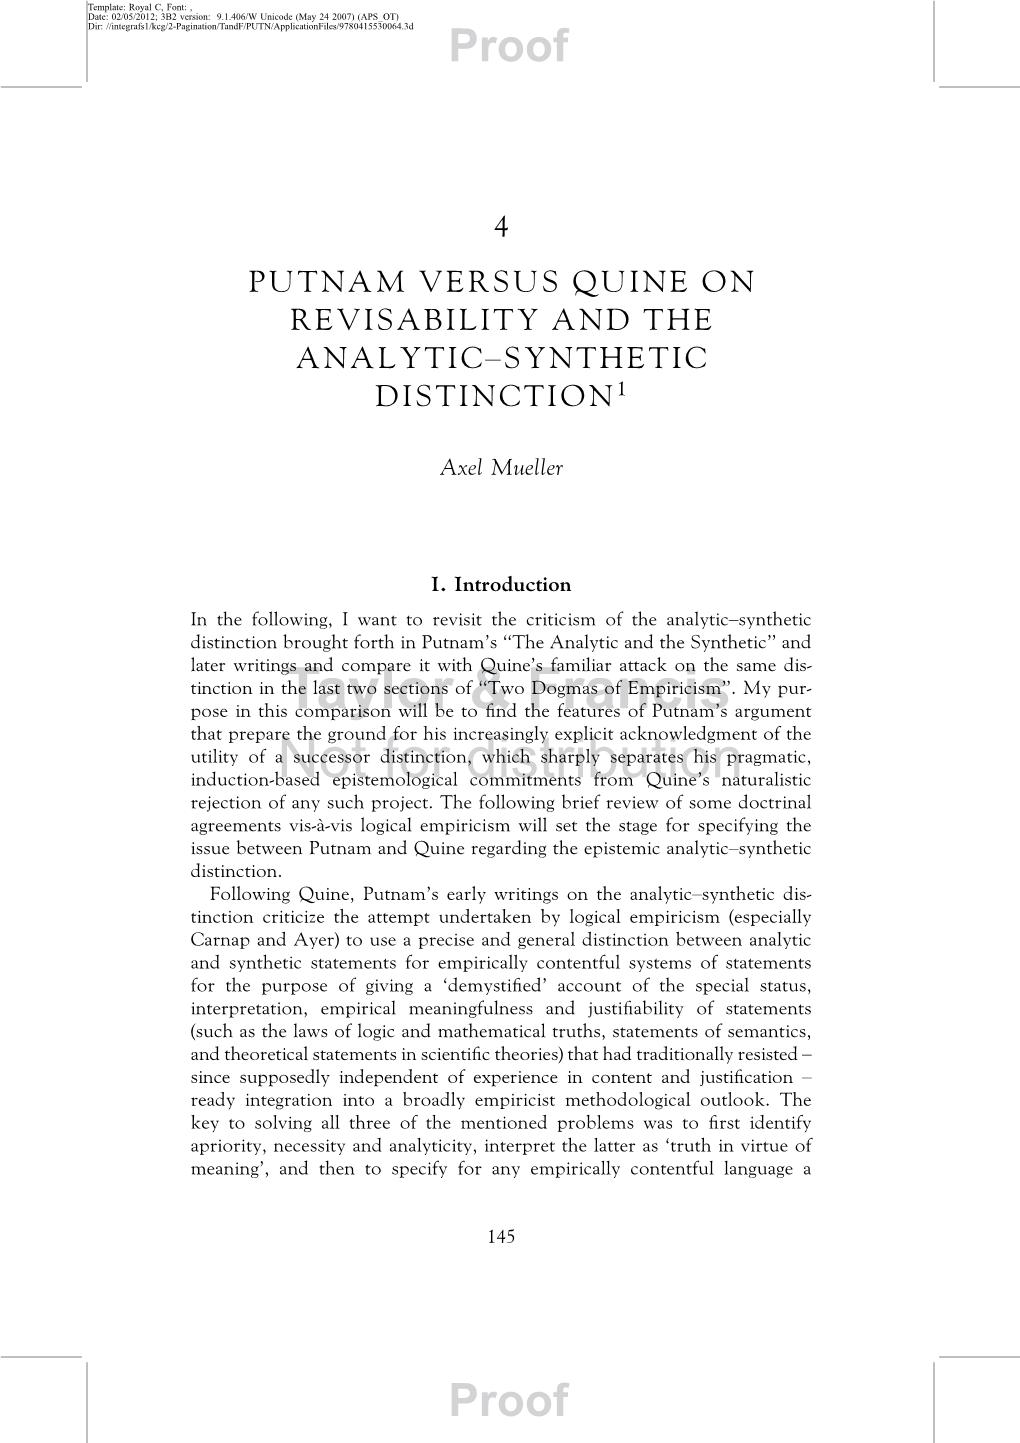 Putnam Versus Quine on Revisability and the Analytic-Synthetic Distinction